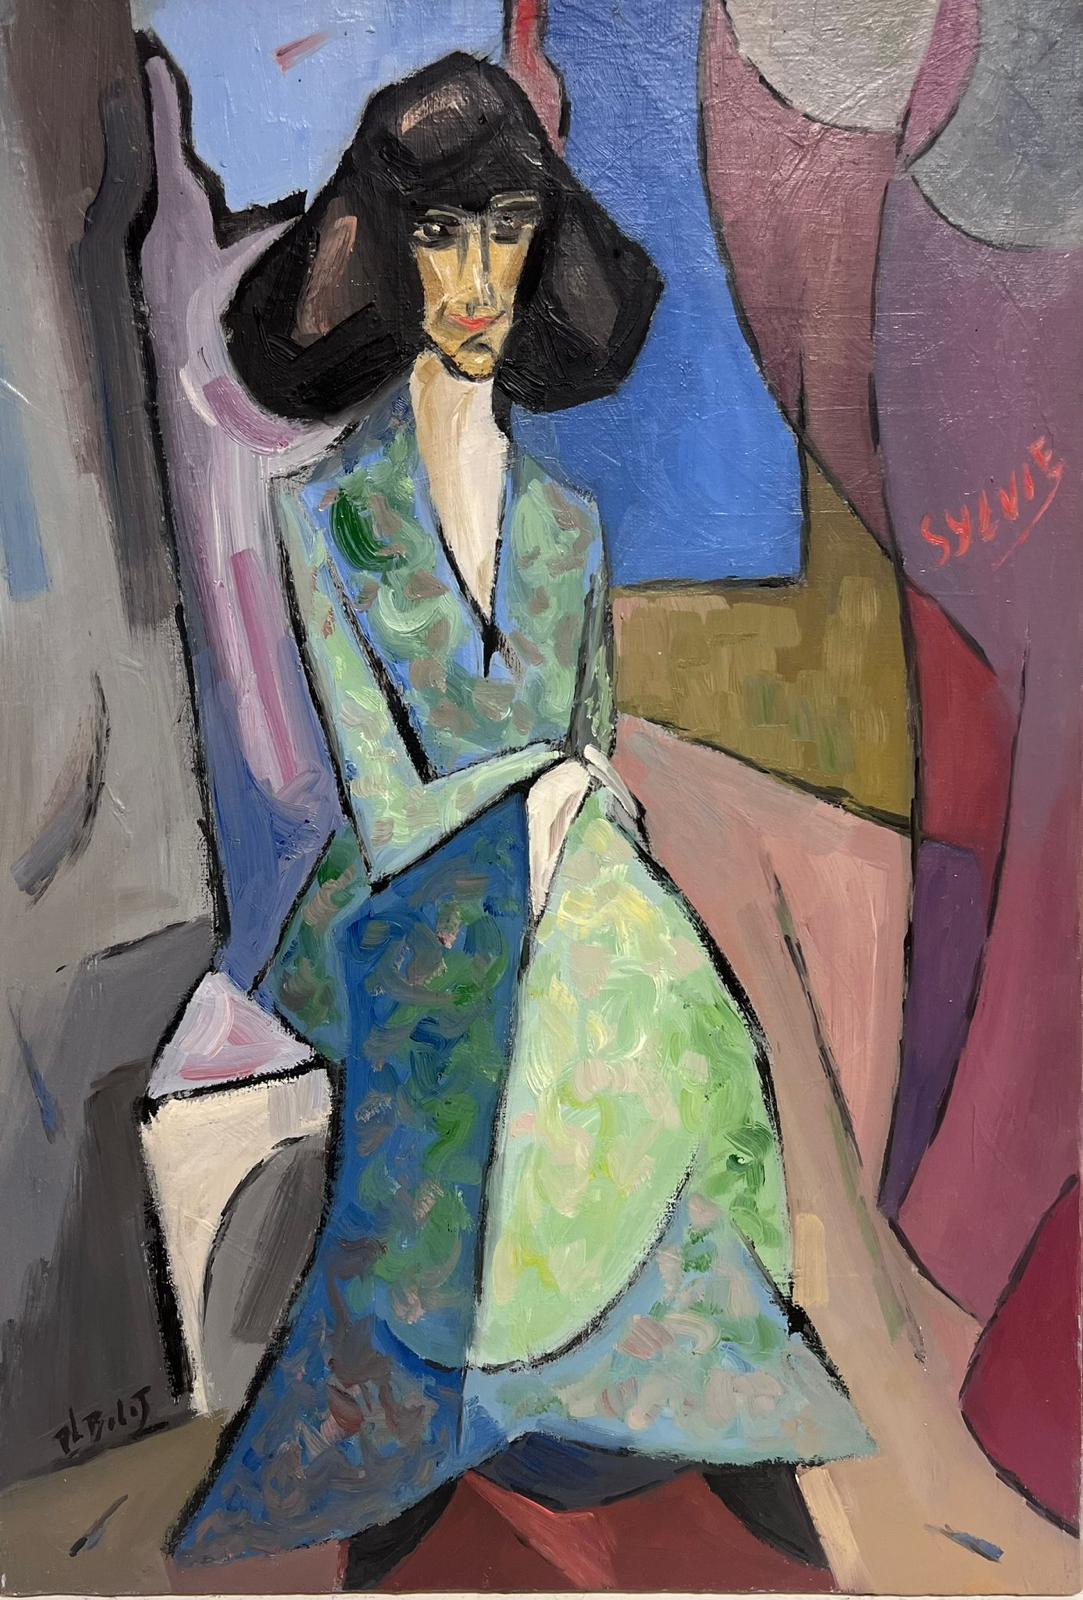 Paul-Louis Bolot (French 1918-2003) Figurative Painting - 1980's French Cubist Modernist Signed Oil Painting Fashionable Lady in Interior